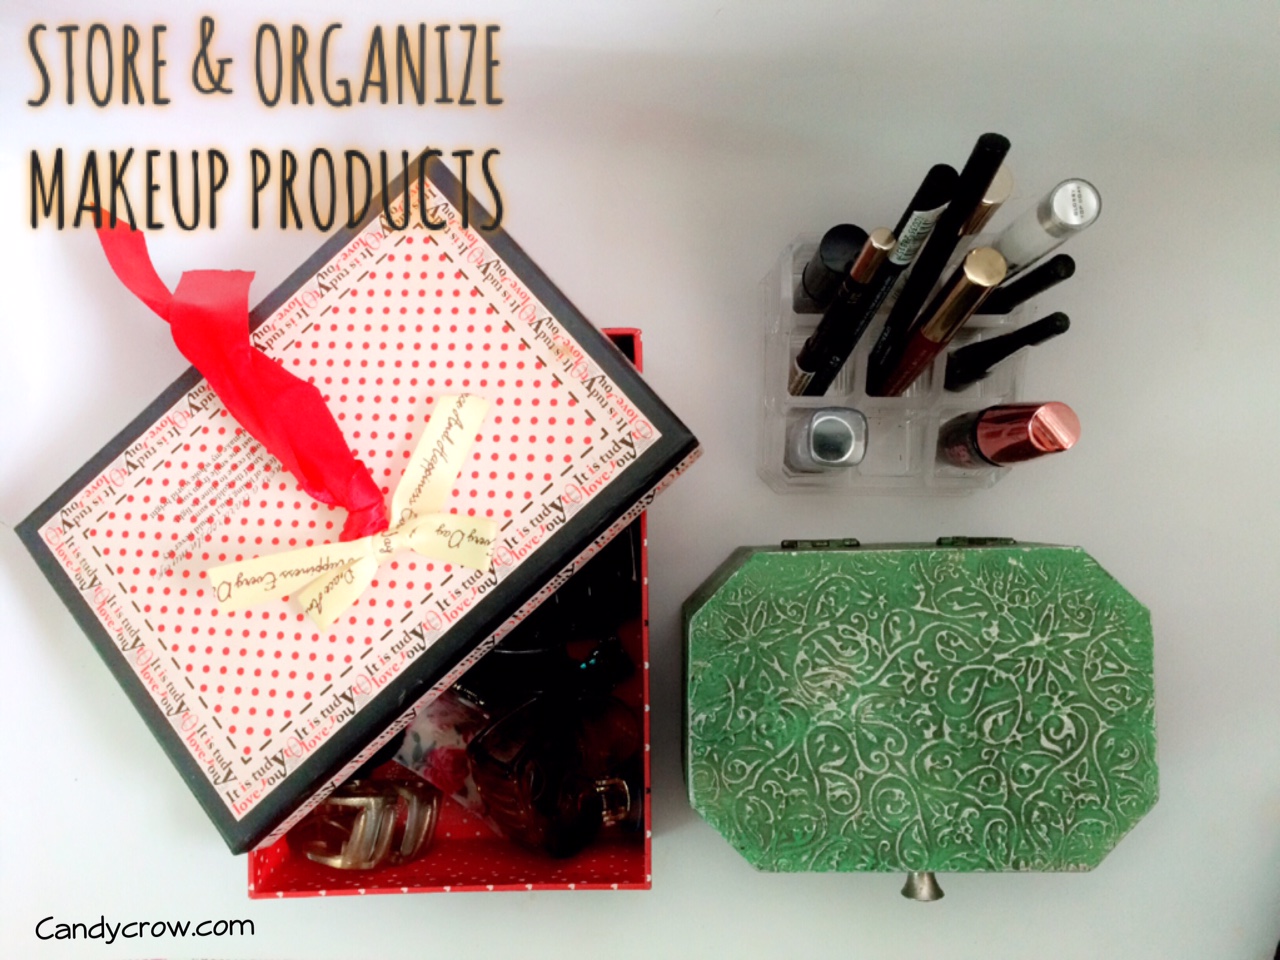 Quick Tips to Organise Makeup beauty Products